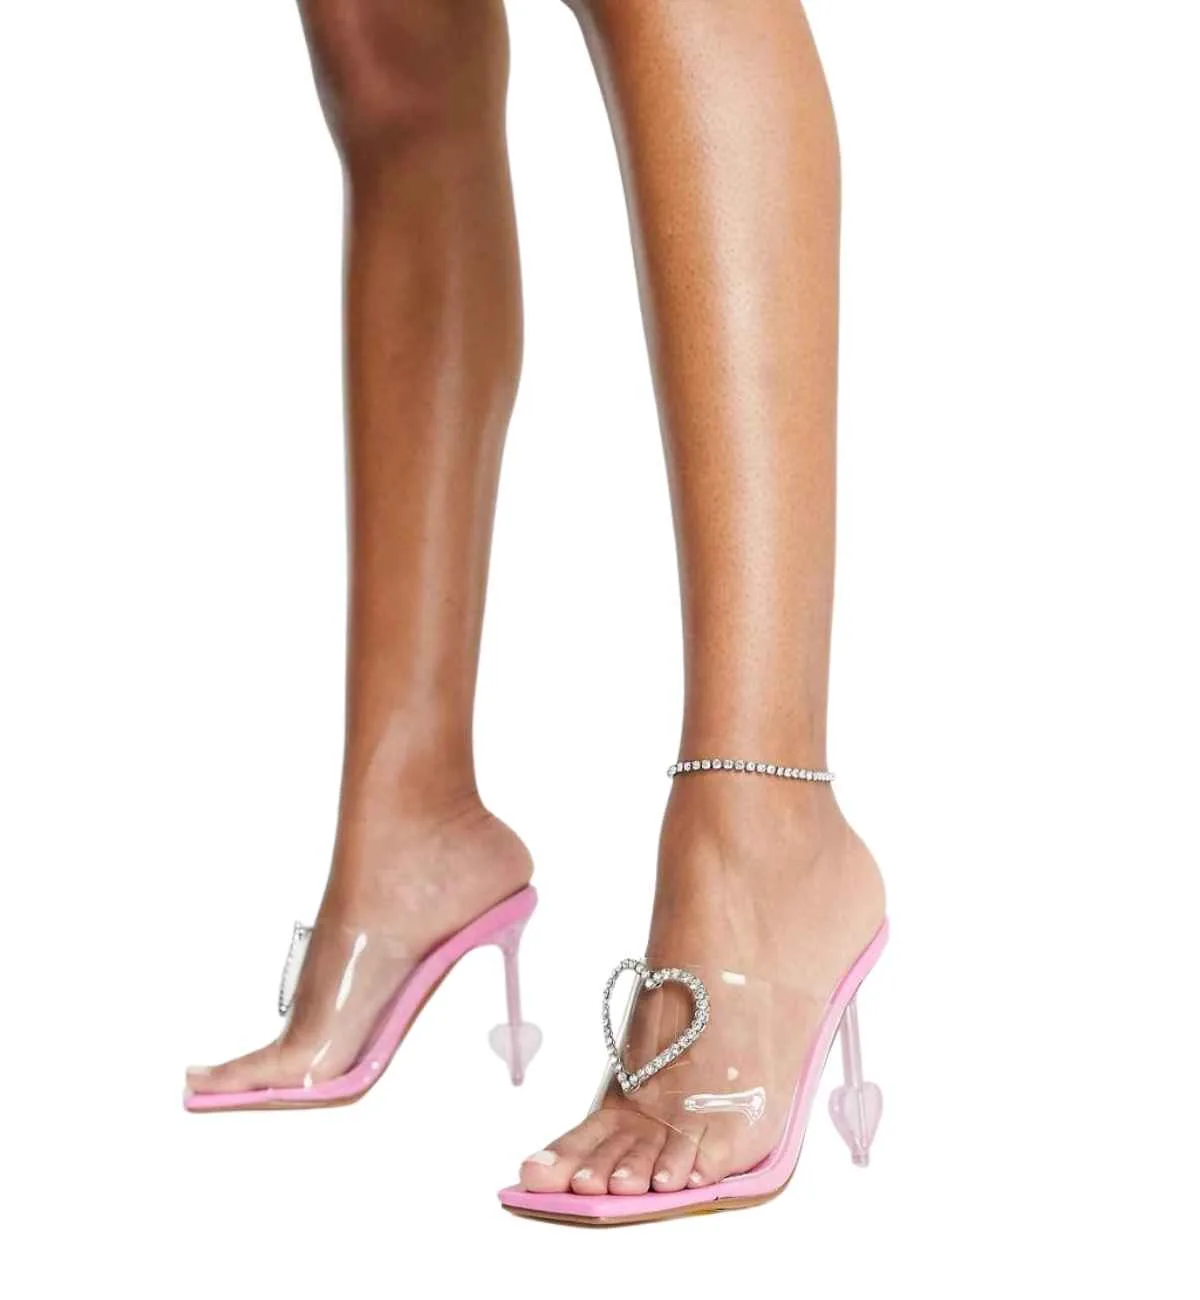 Pink square open toe heart heels with heart embellishments at the front and on the heel on white background.